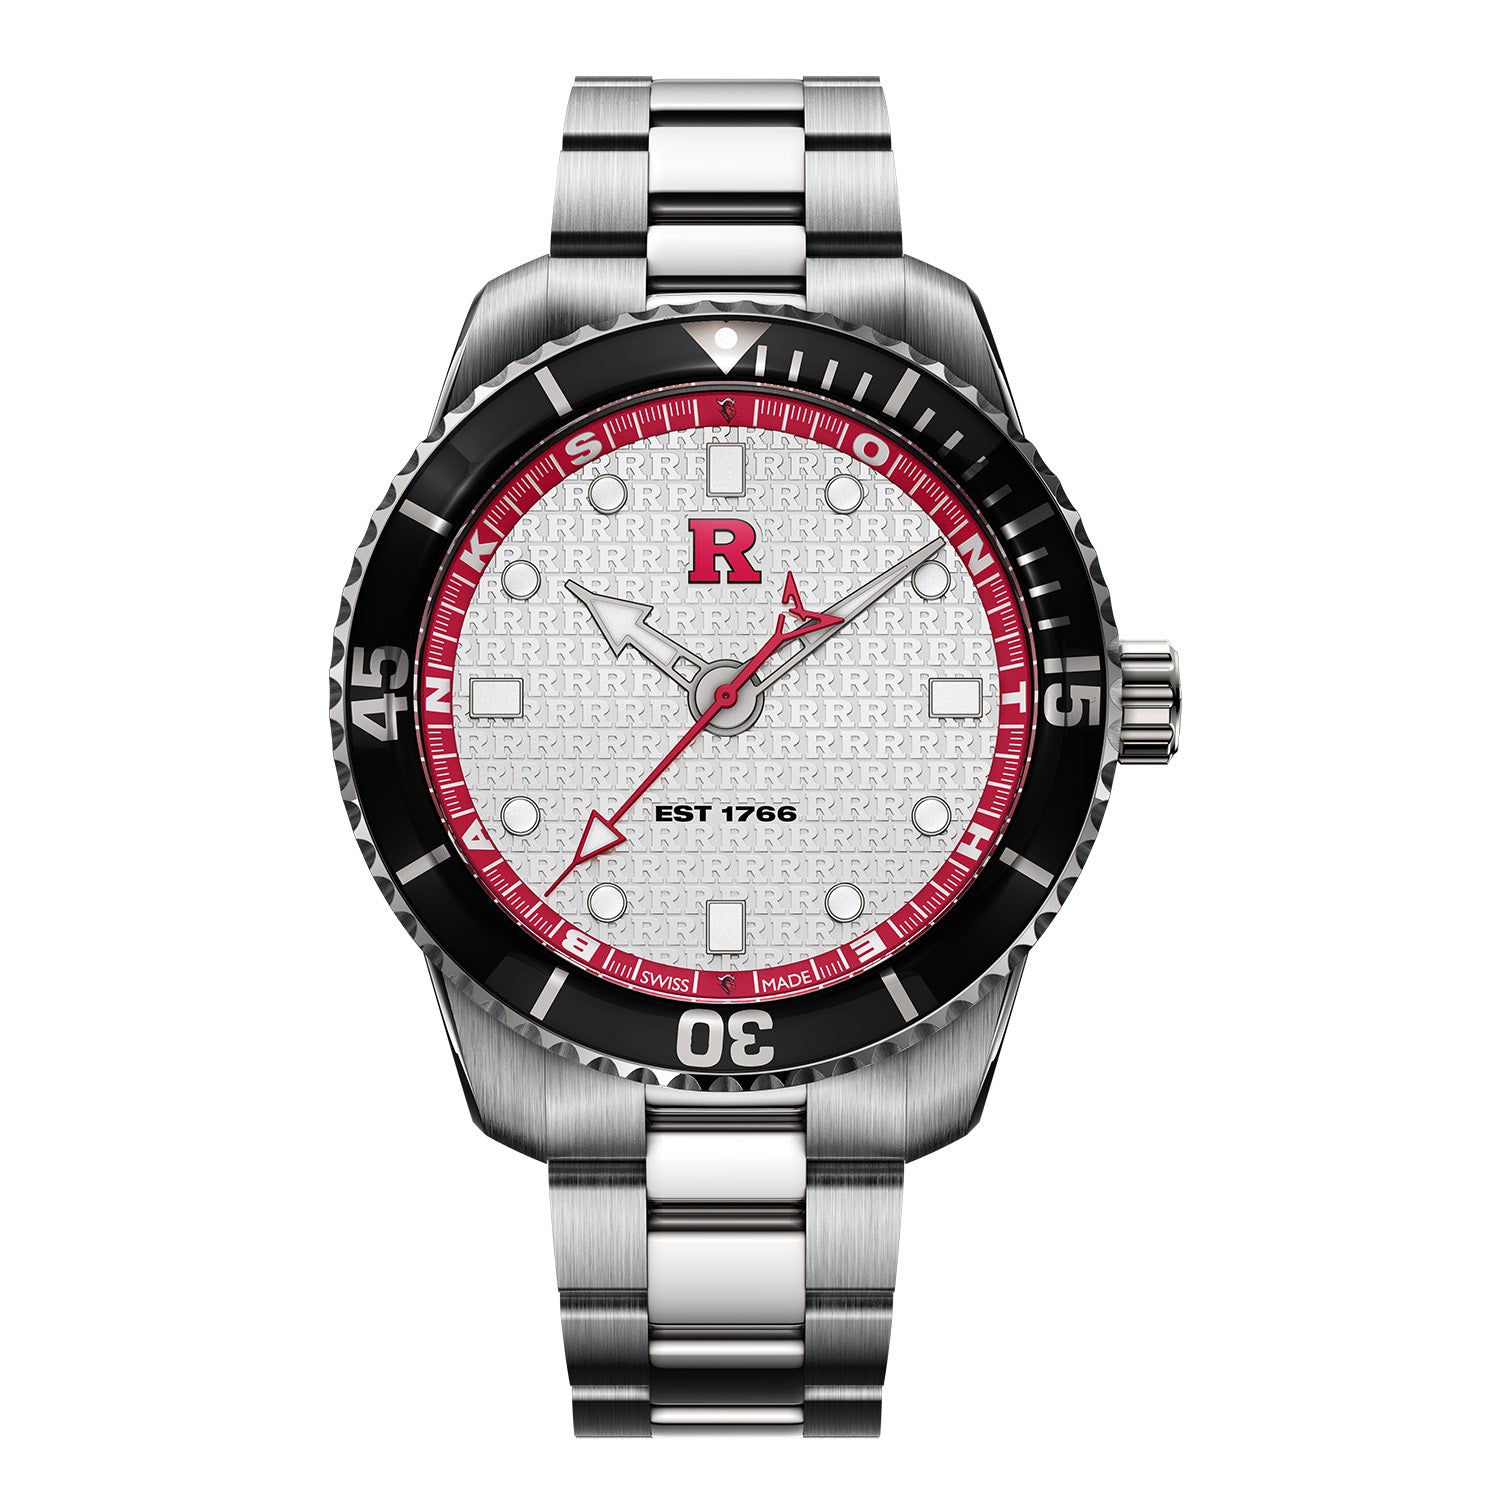 Rutgers University Watch Swiss Made Automatic. Front view.